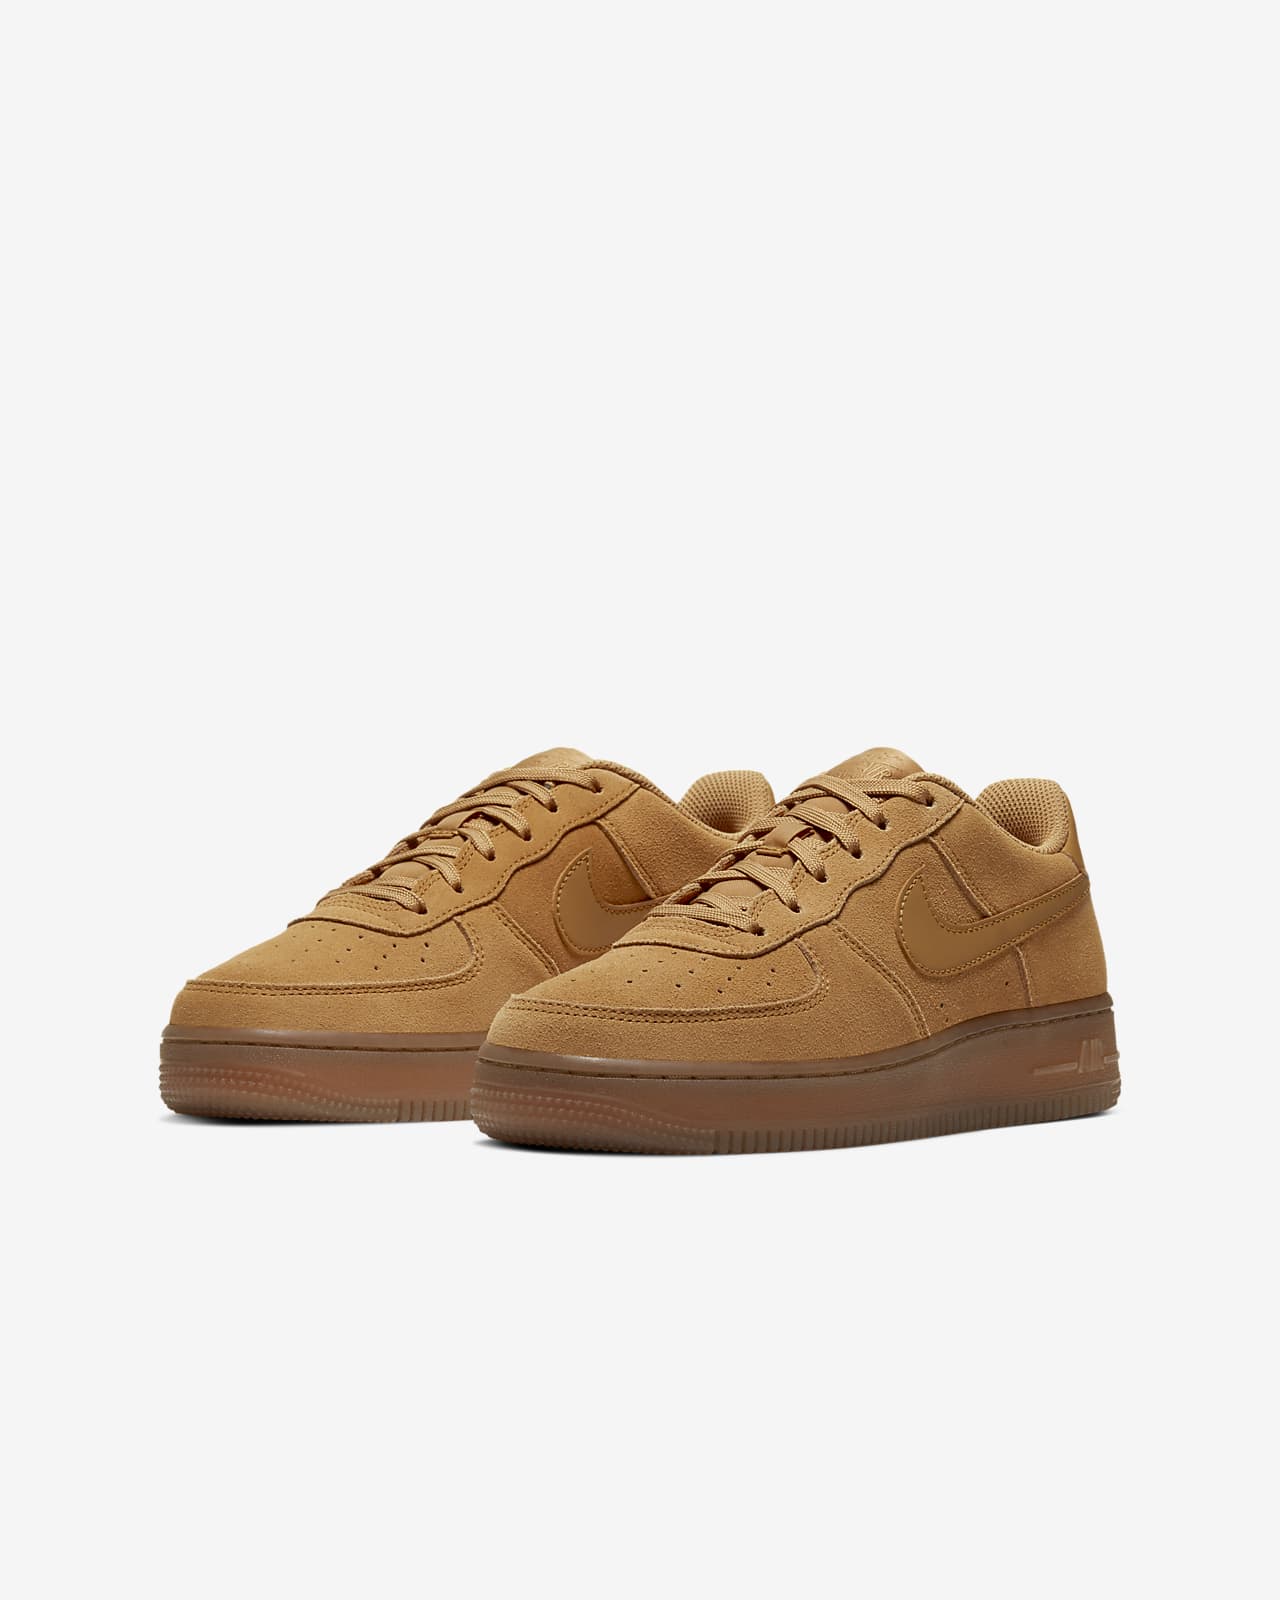 air force one tan suede